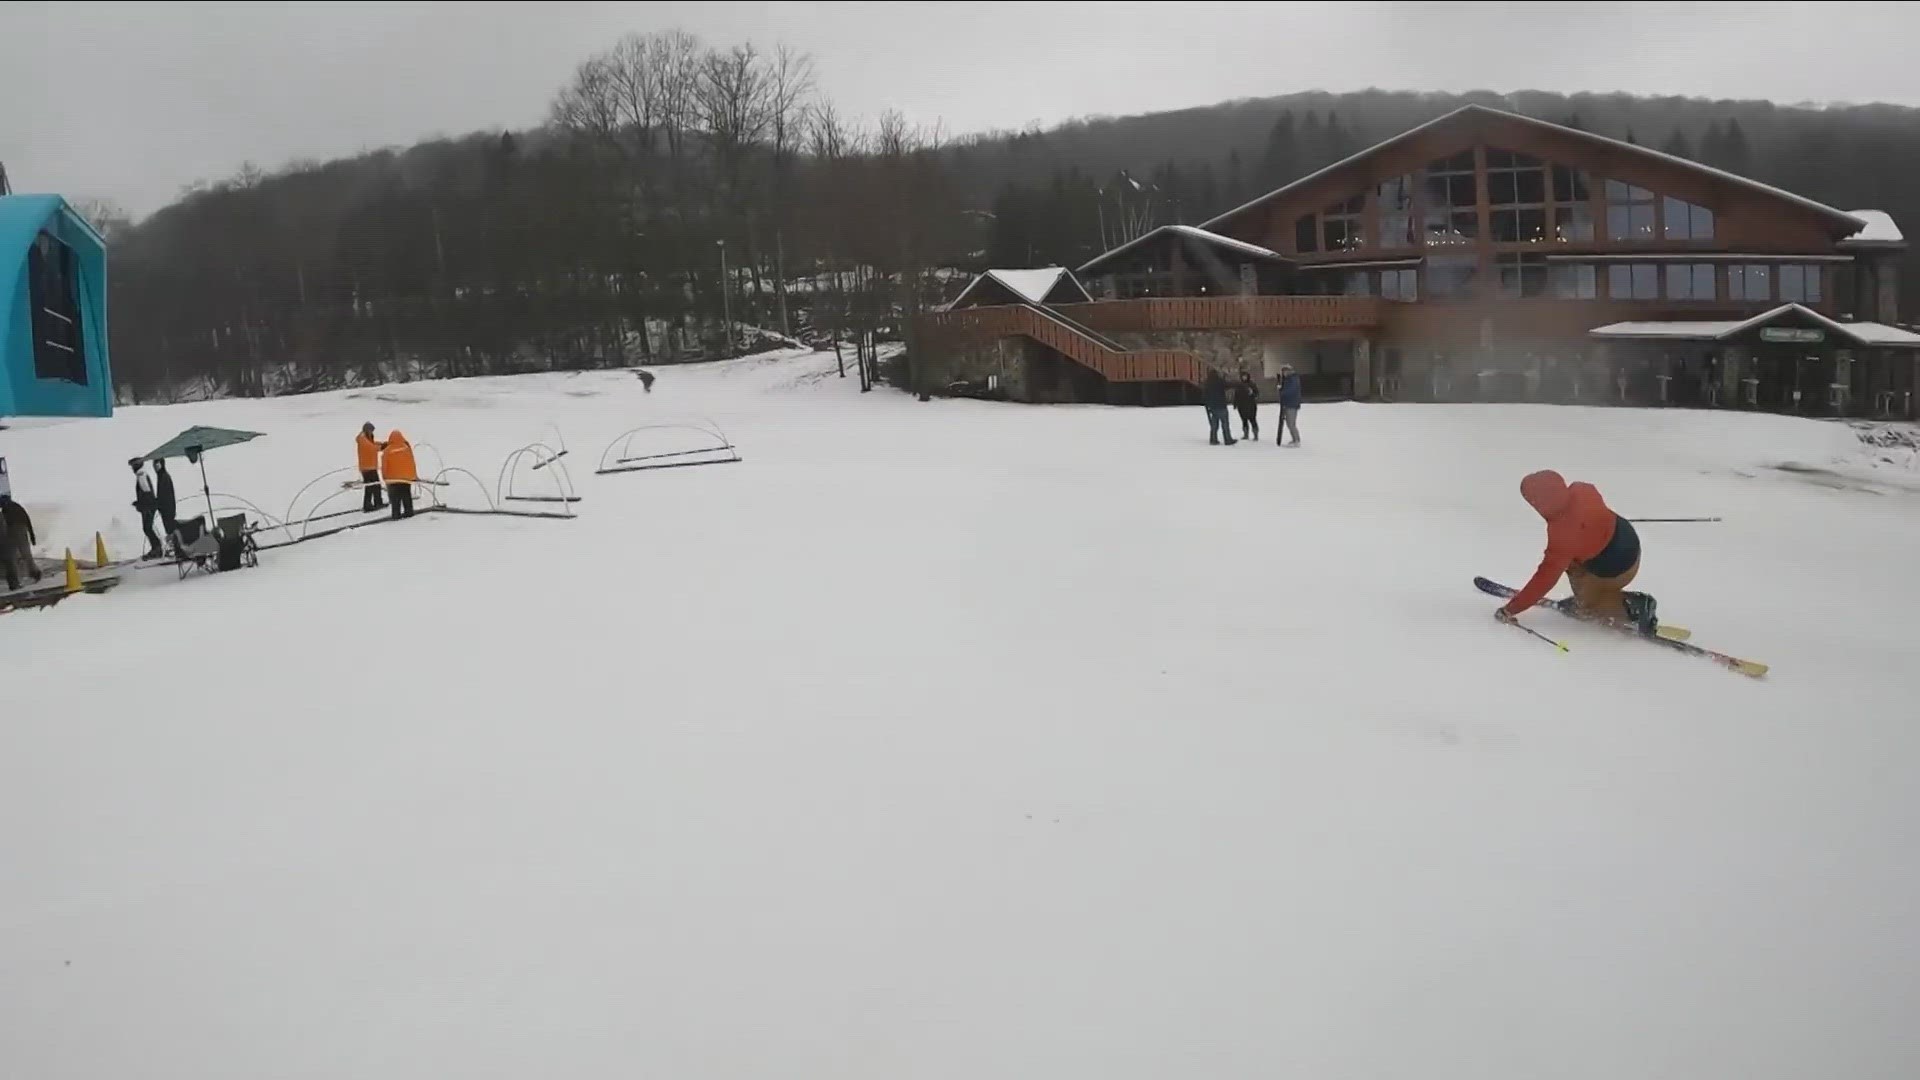 going to open up on November 24th. so, we need some colder temps here in western new york and we will be able to fire up our snow making system.